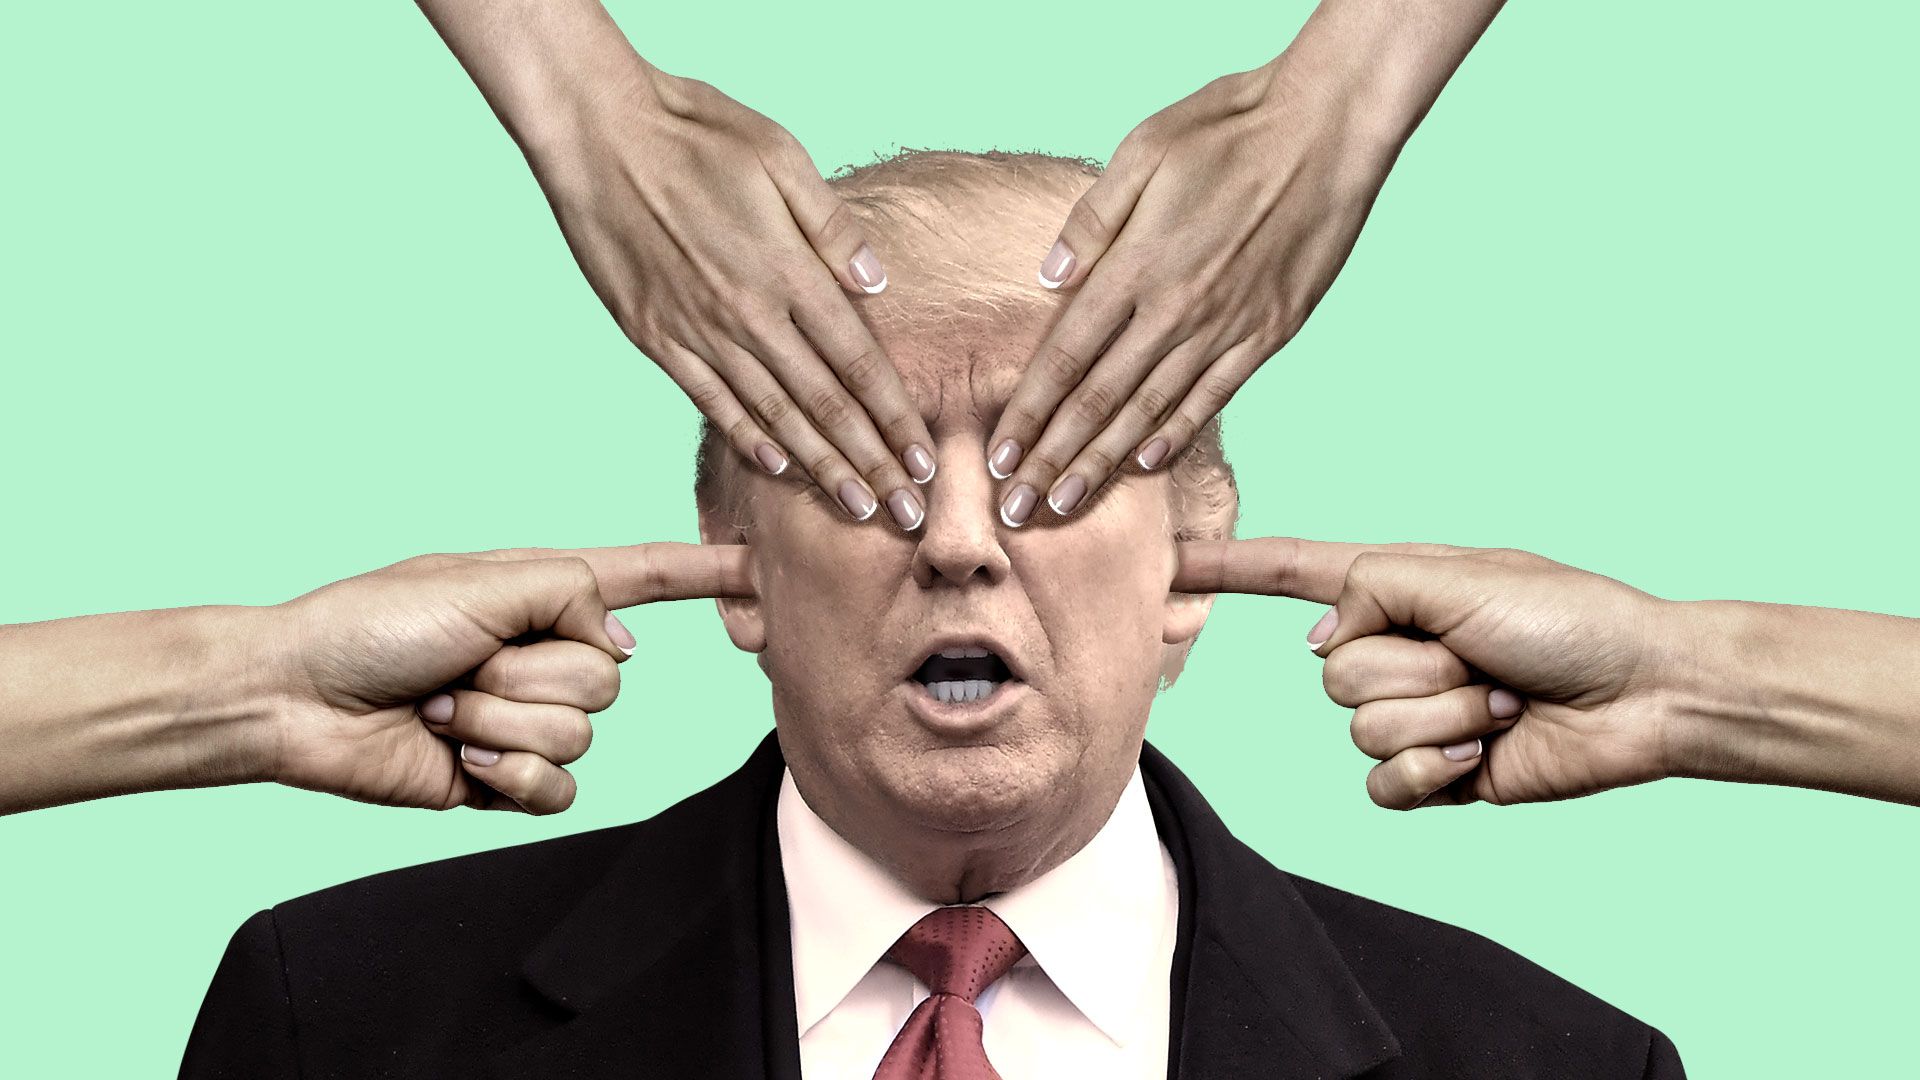 Illustration of hands covering Trumps eyes and ears